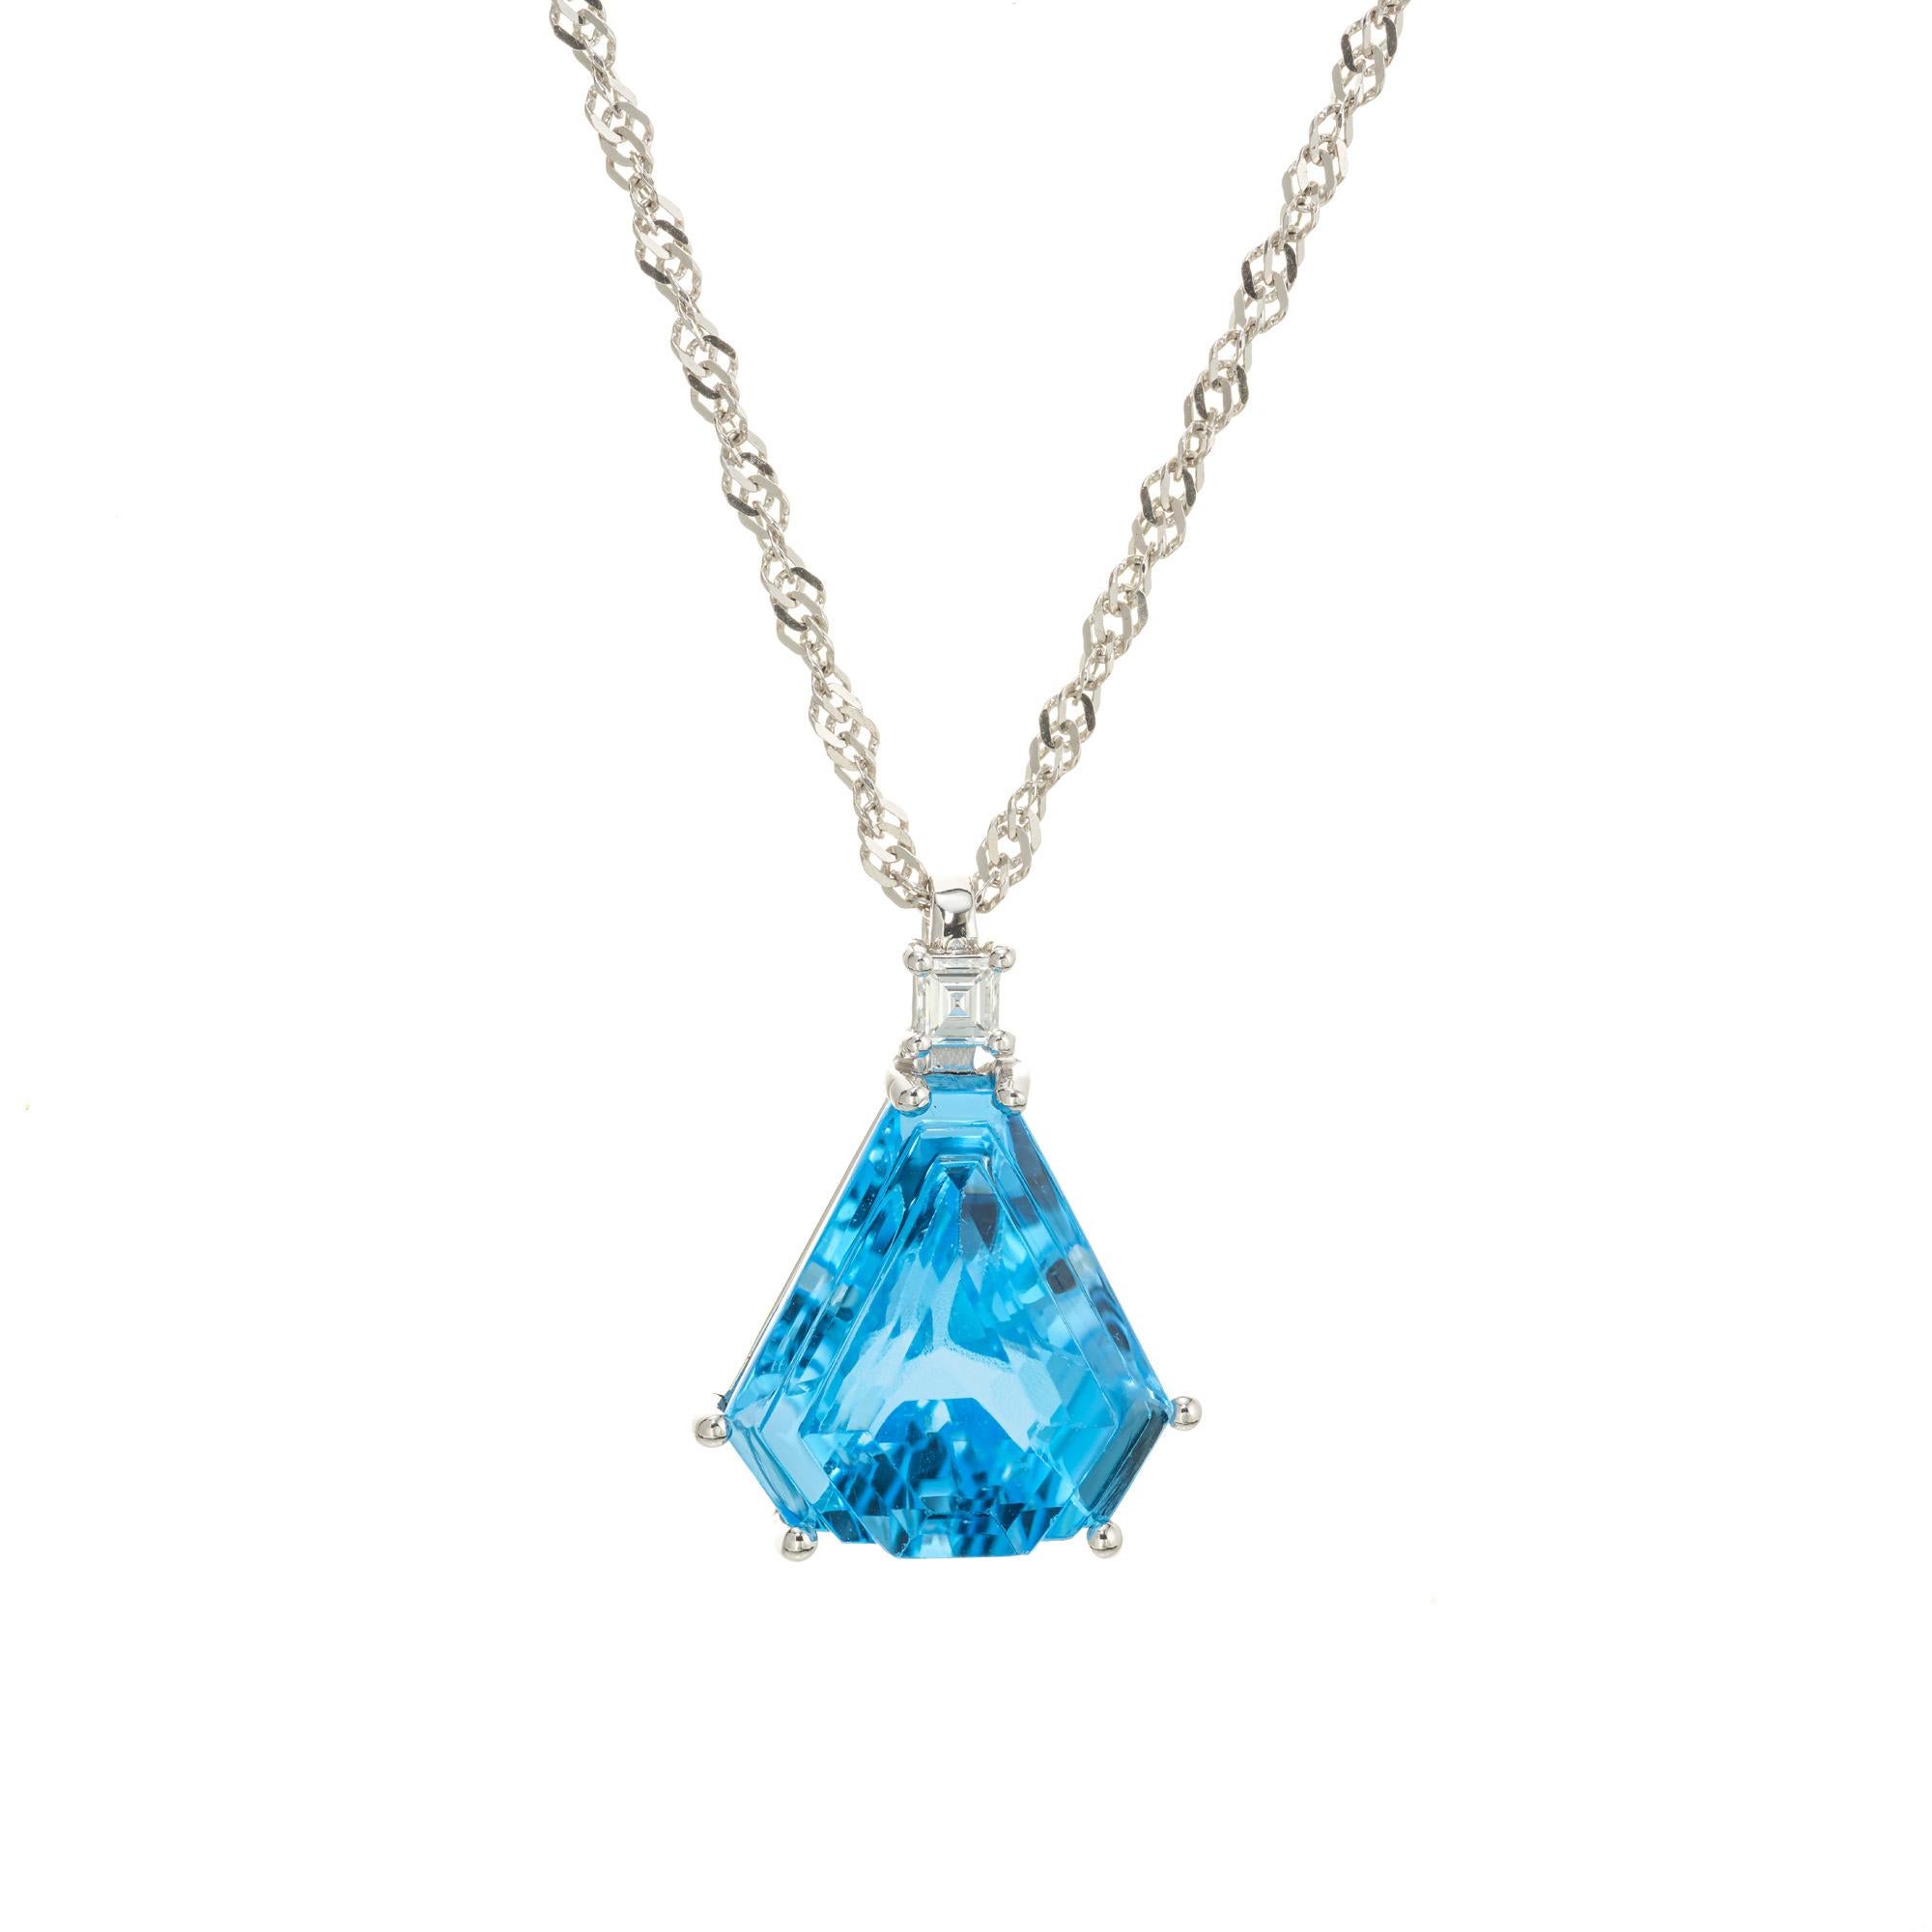 Custom fantasy topaz and diamond pendant necklace. 16.12ct Kite shaped bright blue topaz with a square step cut diamond. 18 inch chain. Designed and crafted in the Peter Suchy Workshop.

1 kite shape blue topaz, approx. 16.12cts
1 square step cut